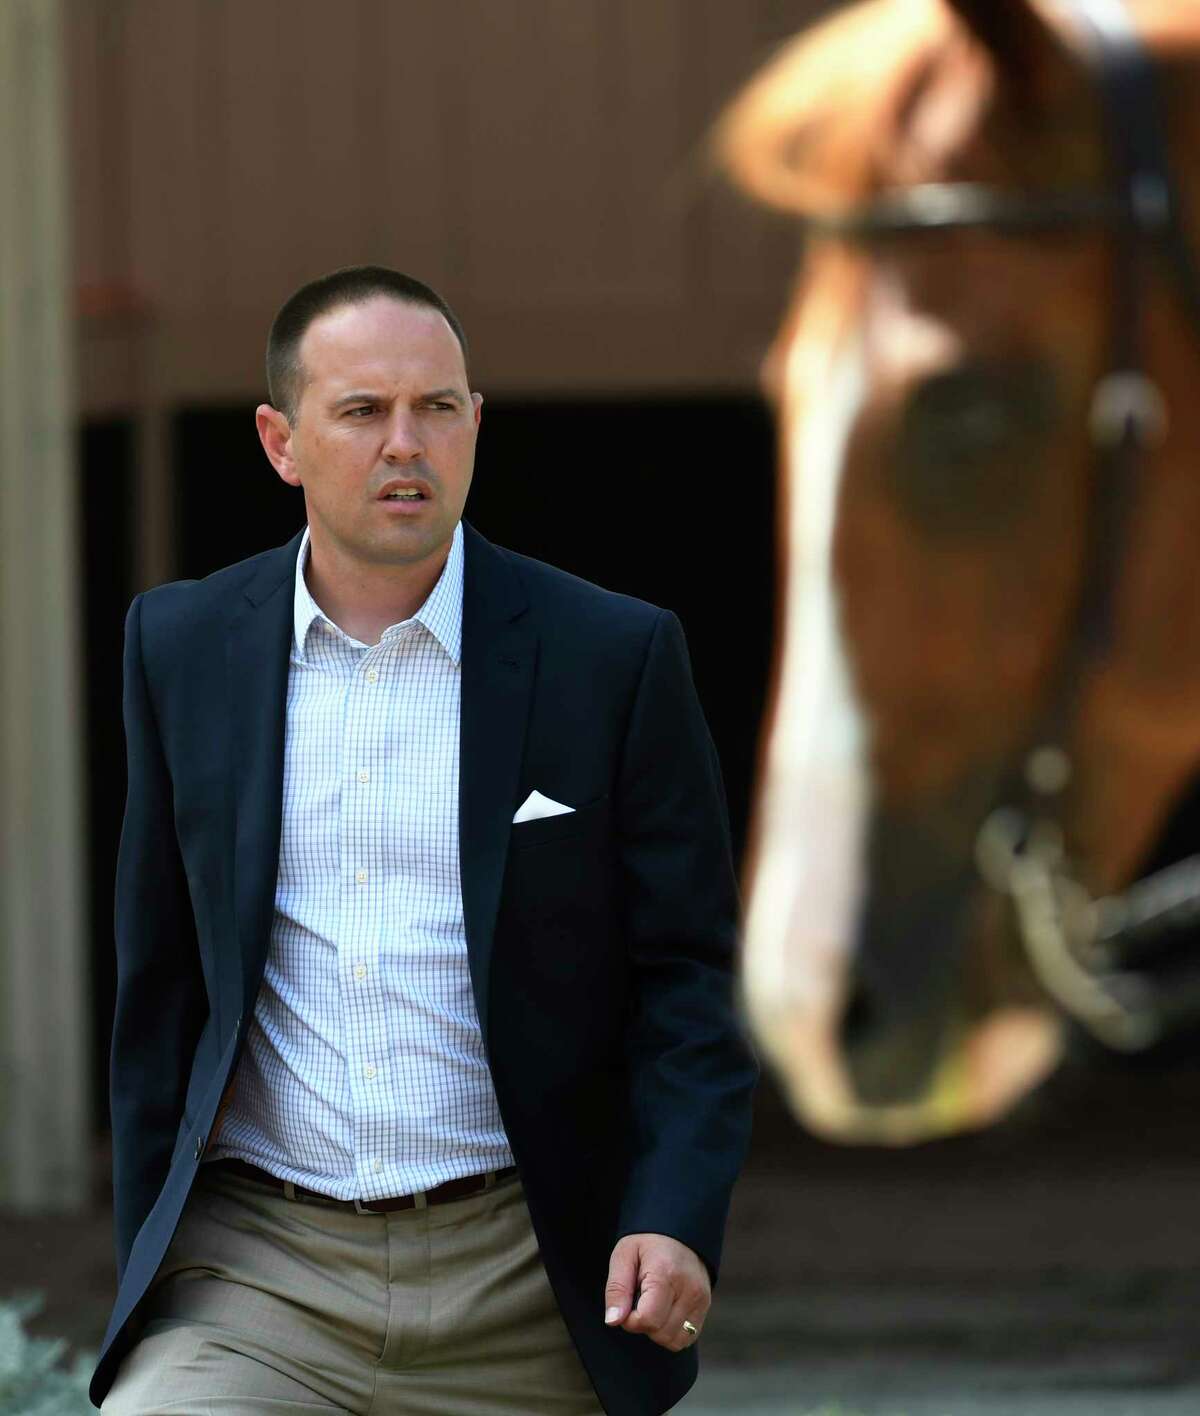 Trainer Chad Brown leaves the paddock after saddling his charge at the Saratoga Race Course Wednesday July 27, 2016 in Saratoga Springs, N.Y. (Skip Dickstein/Times Union)